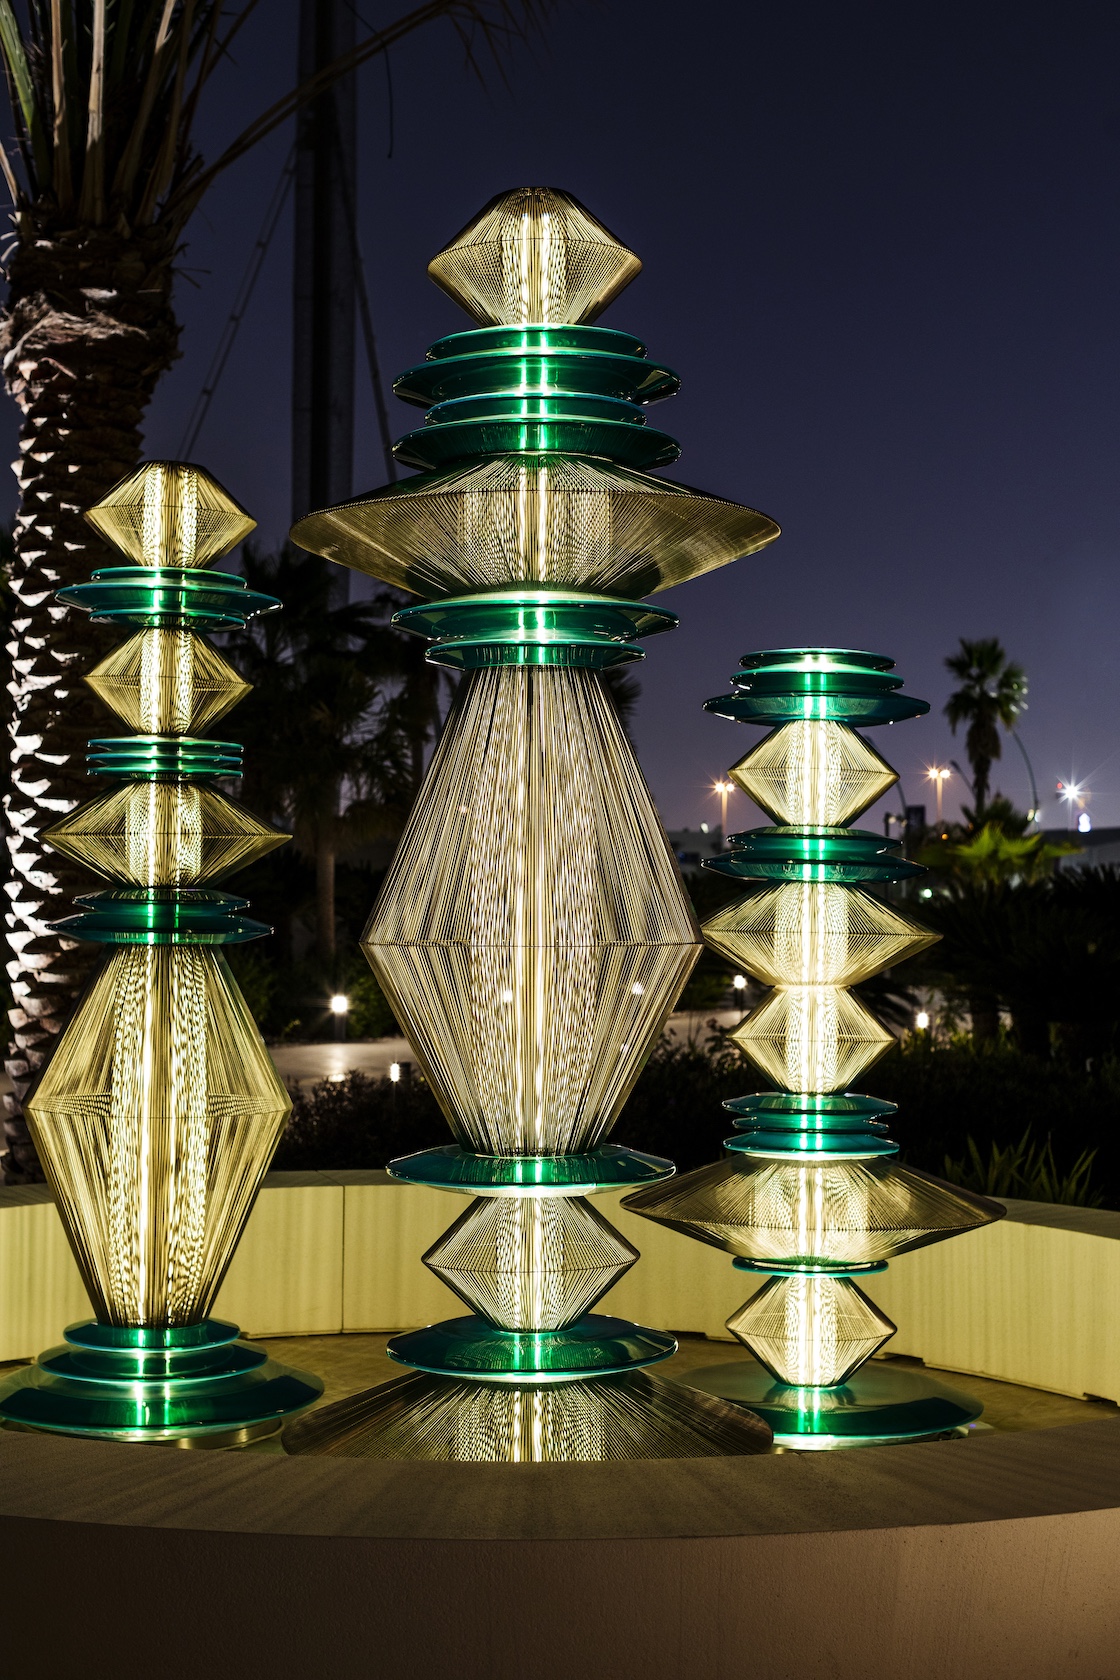 Ripples Of Hope by Asma Derouiche at Al Mujadilah . The photo shows three of the sculptures